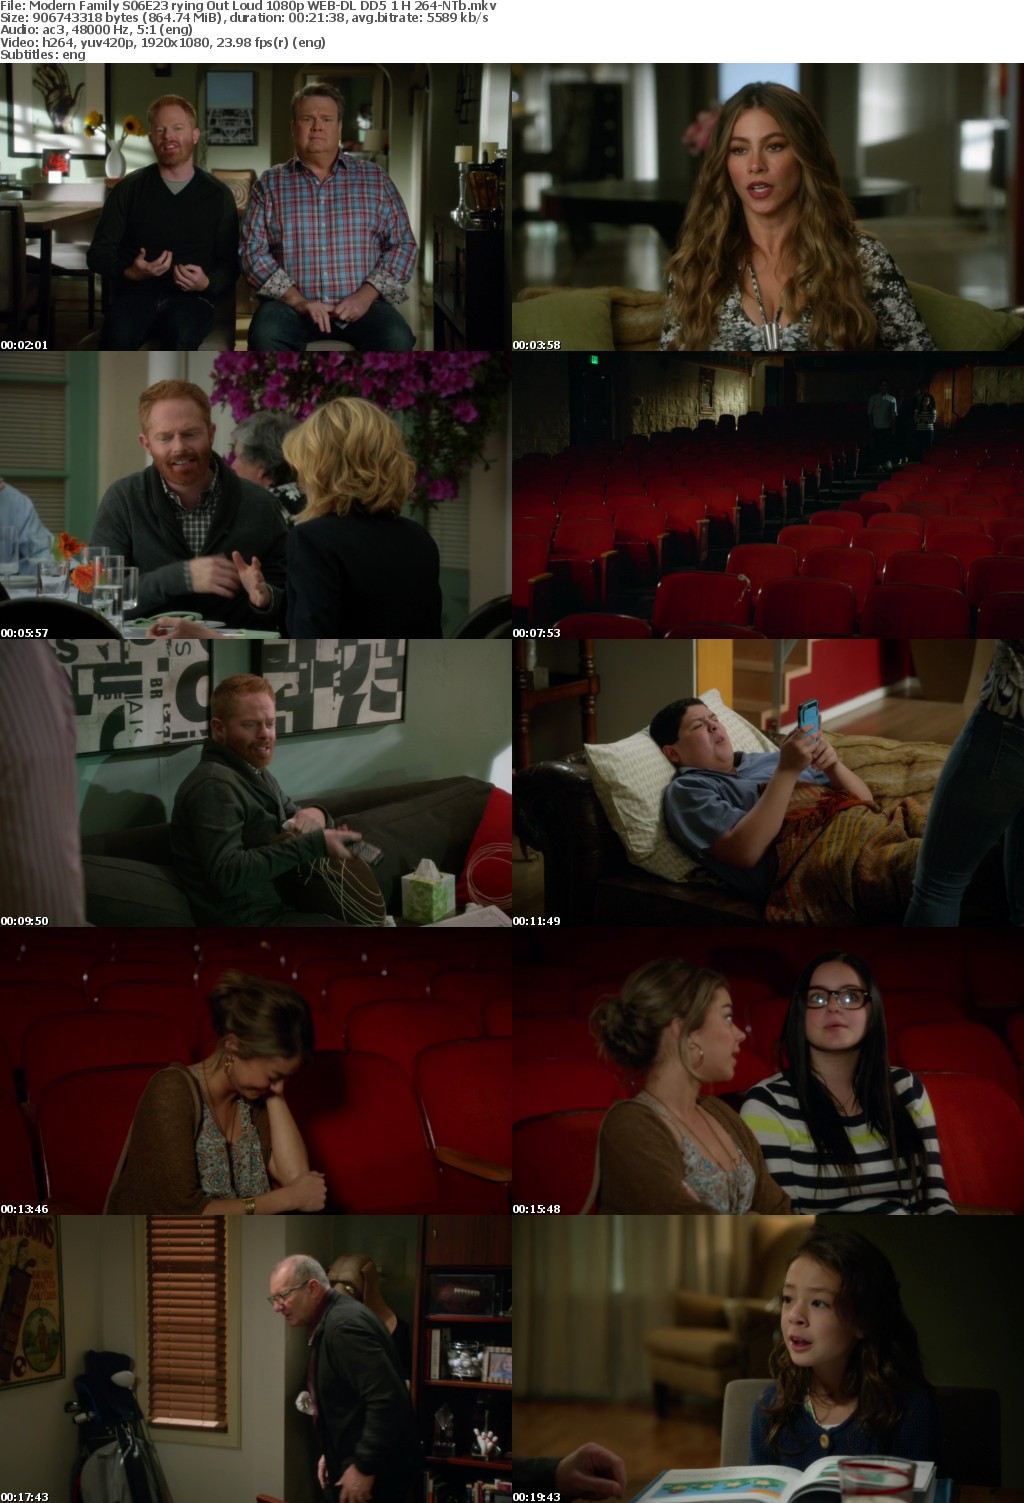 Modern Family S06E23 rying Out Loud 1080p WEB-DL DD5 1 H 264-NTb